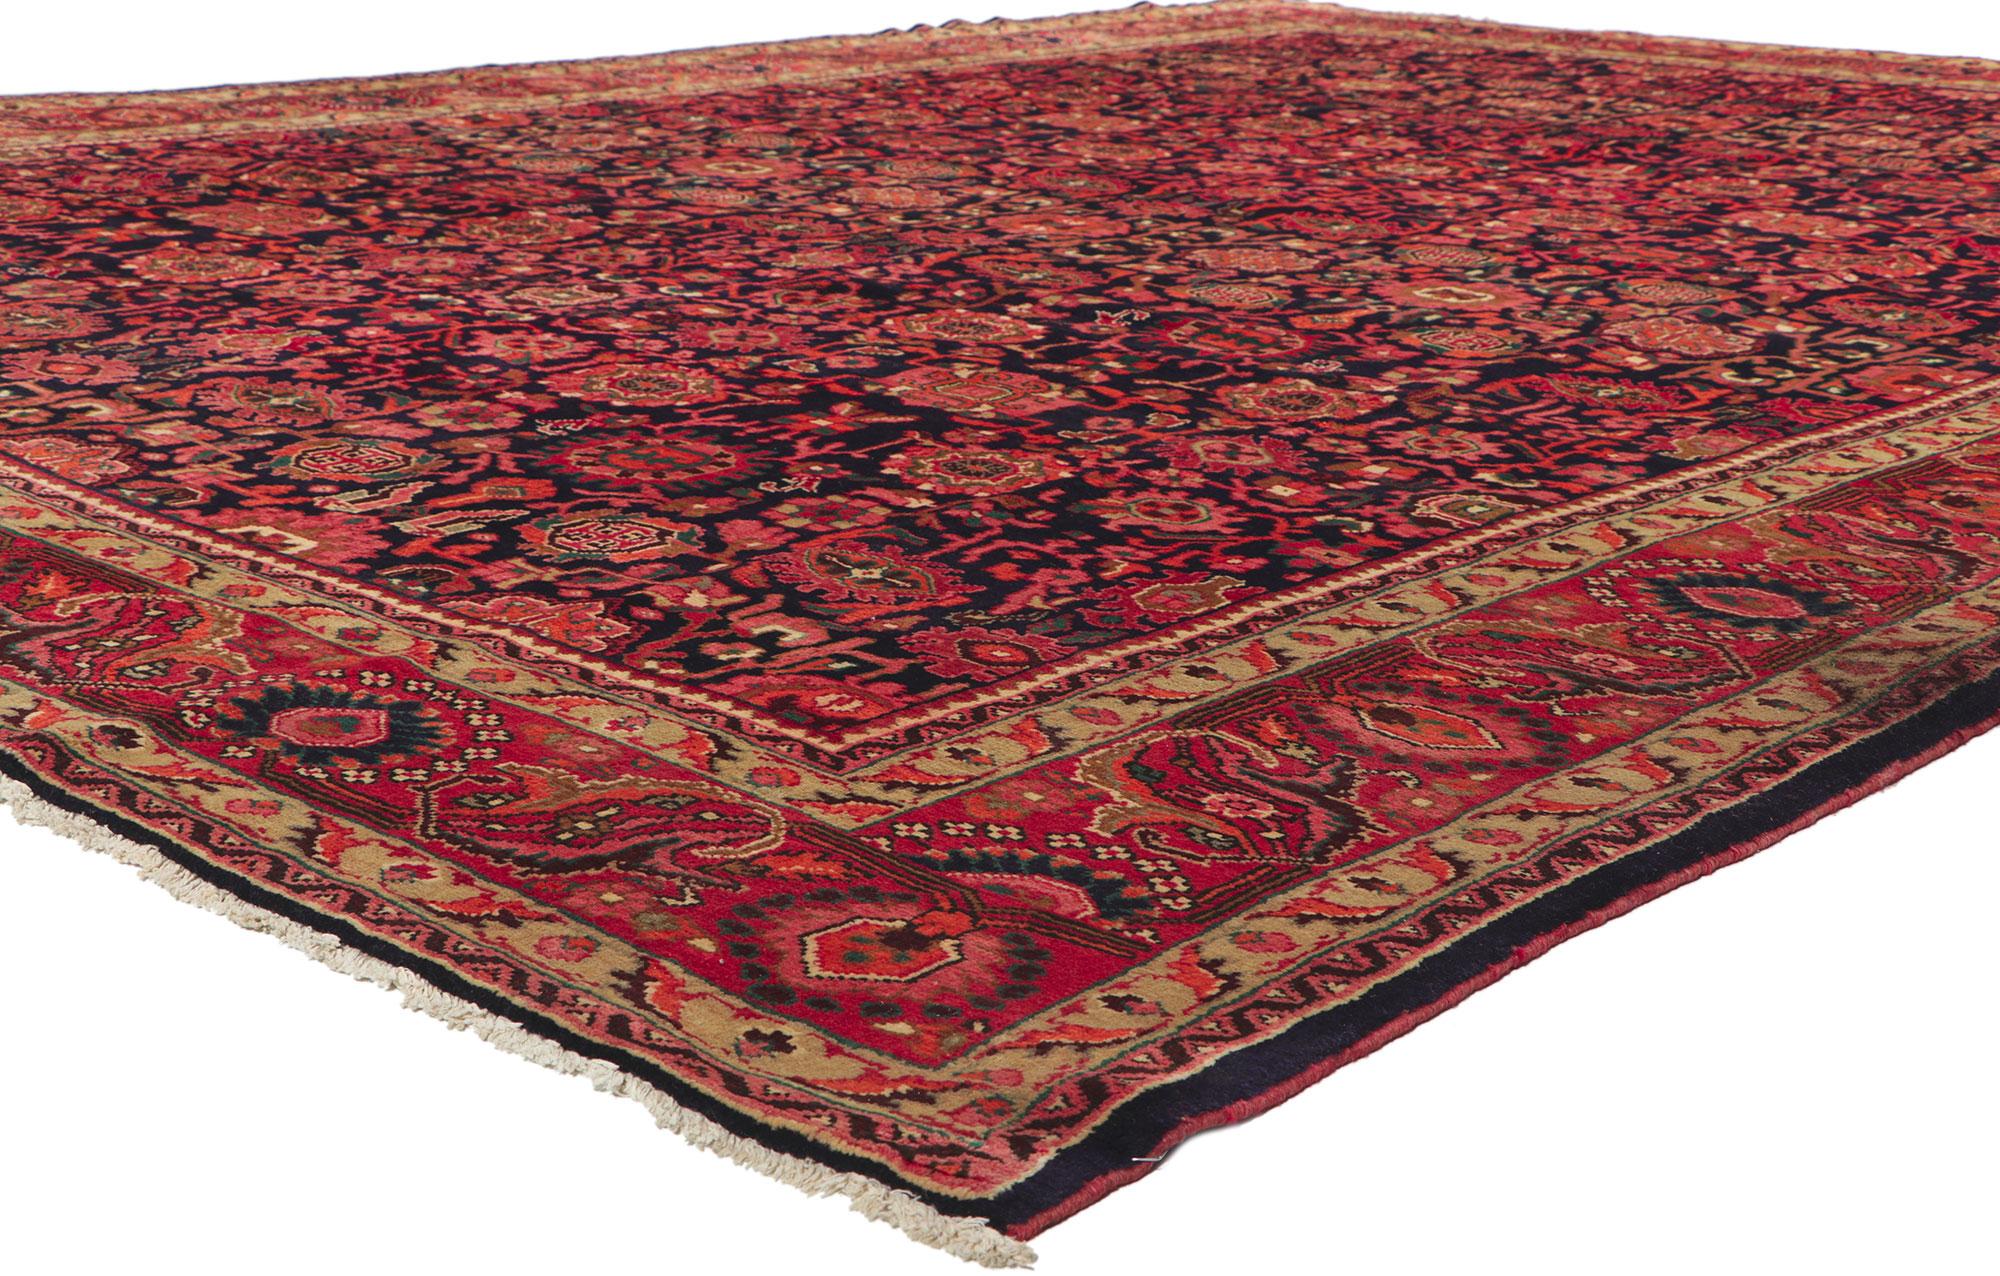 61102 Vintage Persian Malayer Rug, 10'07 x 14'01. ?Emanating a timeless design and beguiling beauty in saturated colors, this hand-knotted wool vintage Persian Malayer rug is poised to impress. An allover repeating botanical pattern spread across